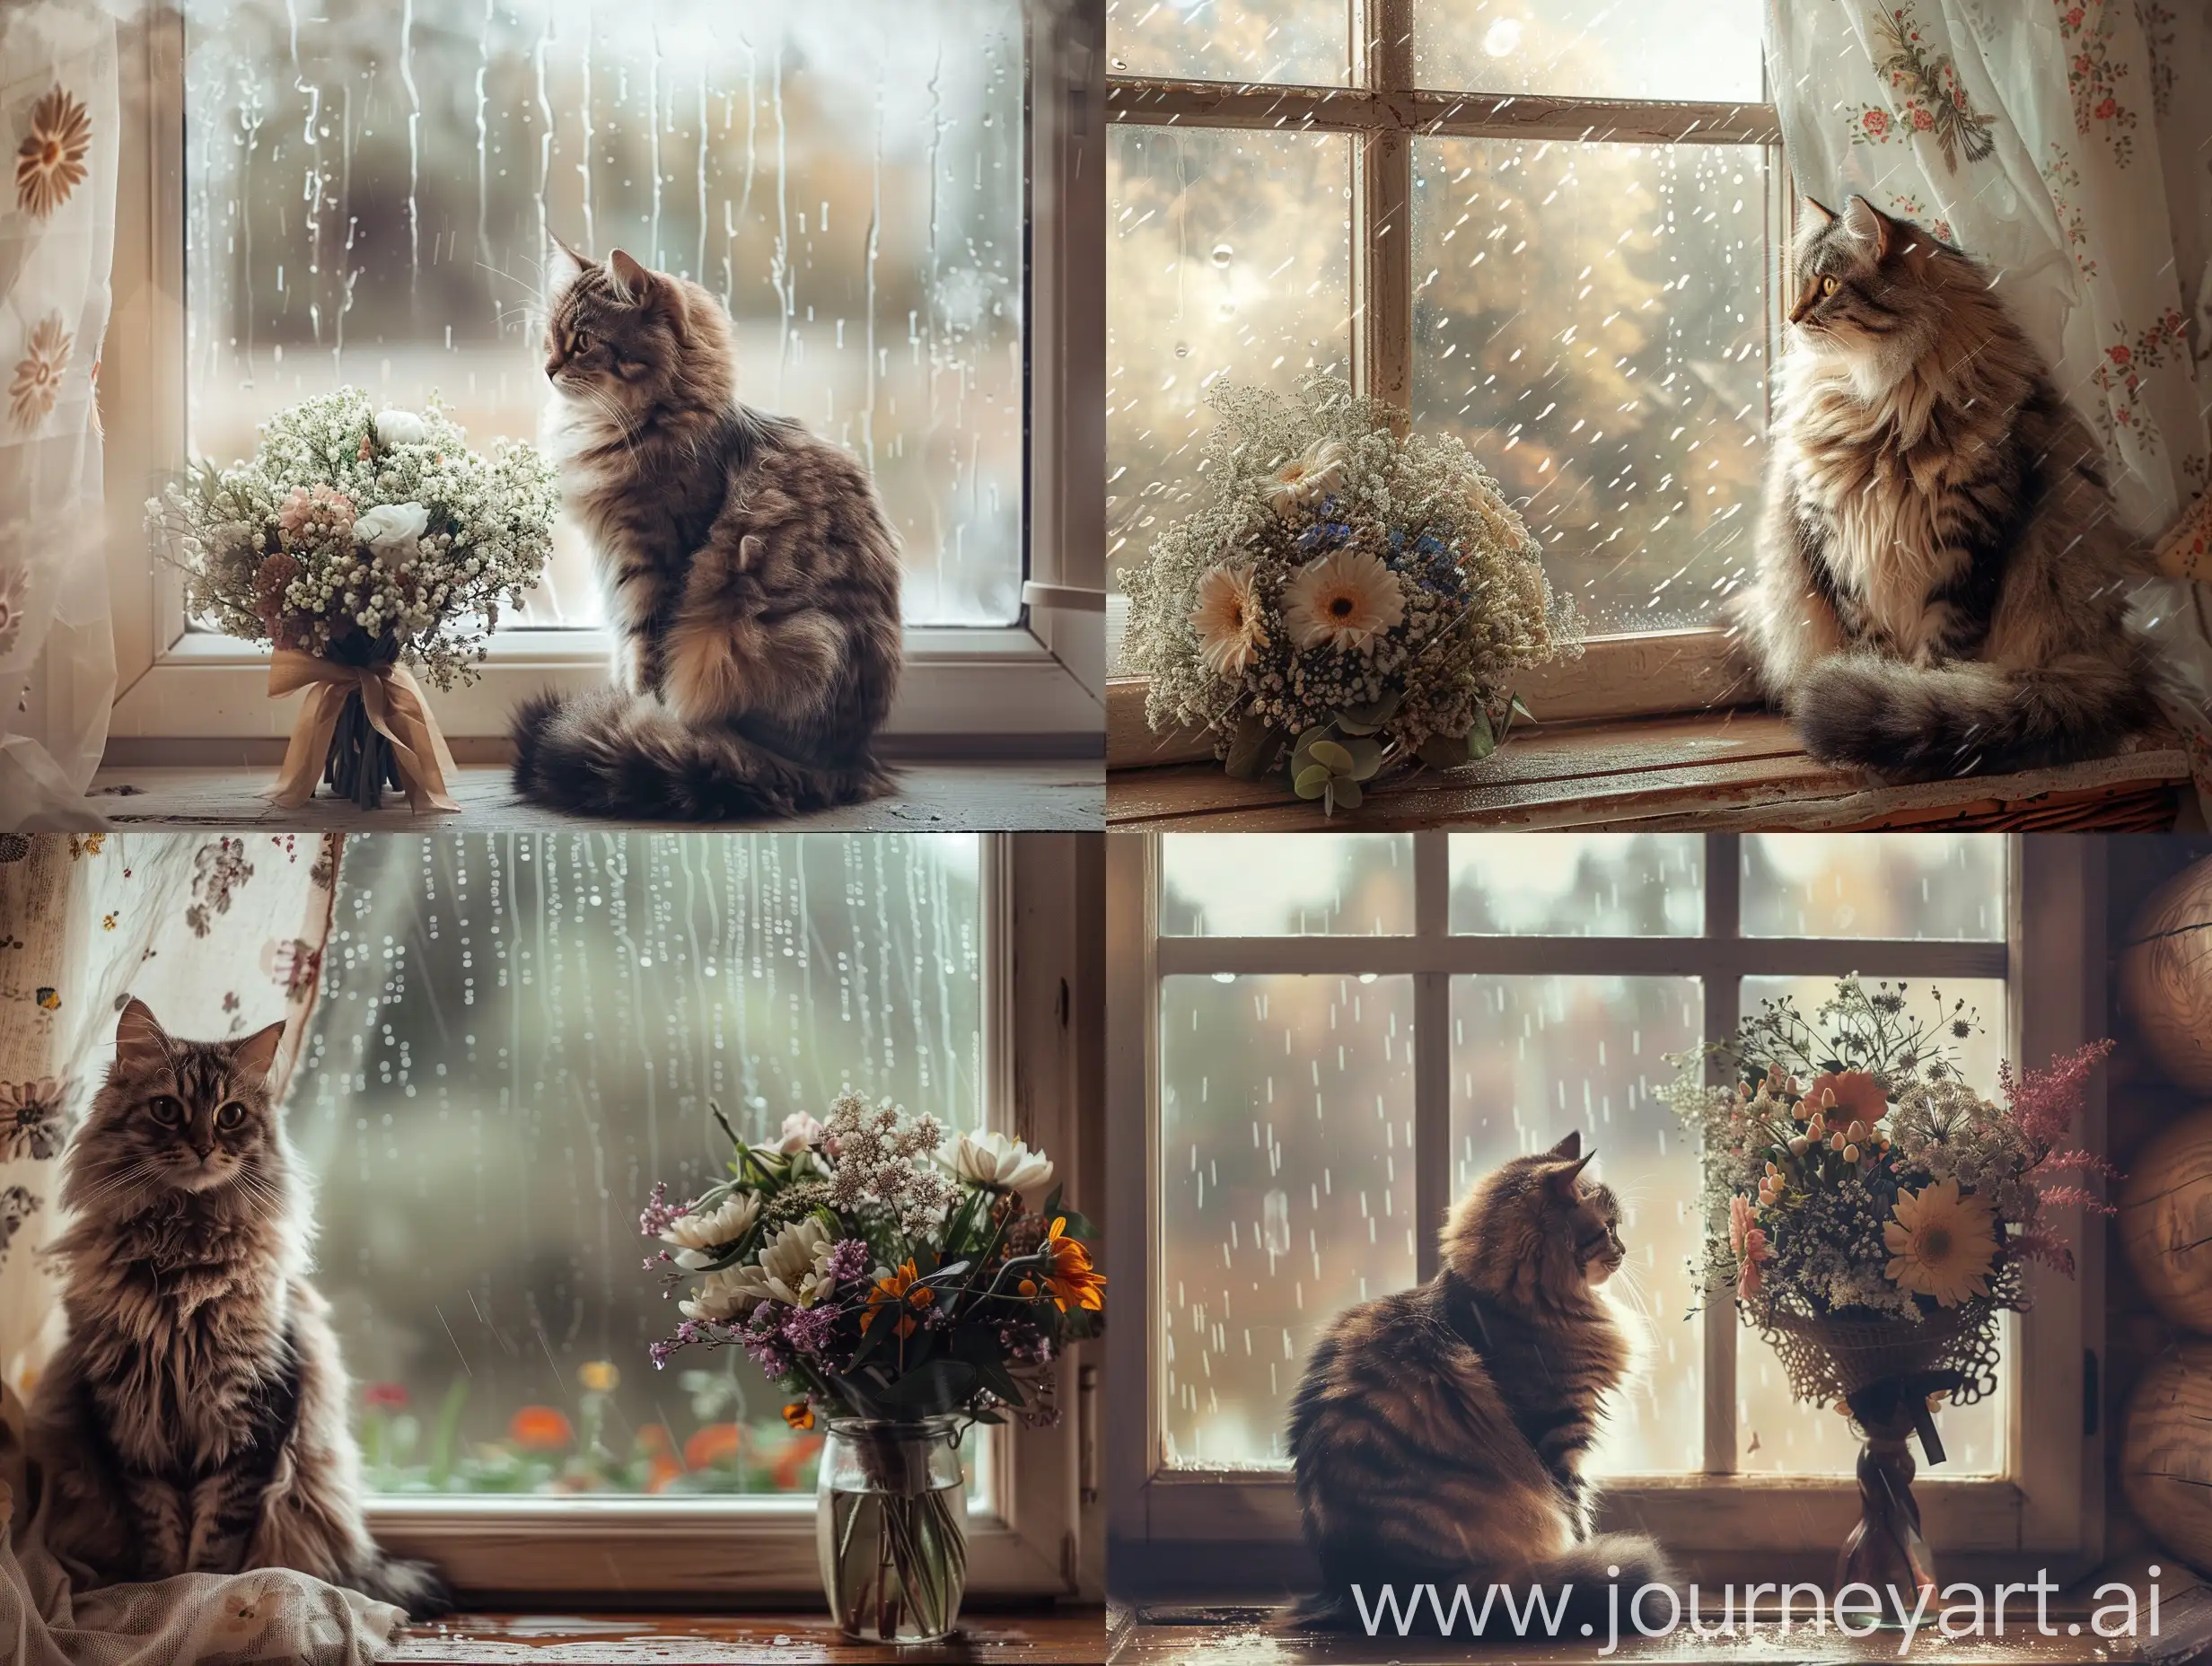 photo, 4k, high quality, a fluffy cat sits on the window in a cottage, next to a bouquet of flowers, it’s raining outside the window, cloudy, summer day, cozy warm sunlight, dim colors, neutral colors, high quality, highest detail, picturesque